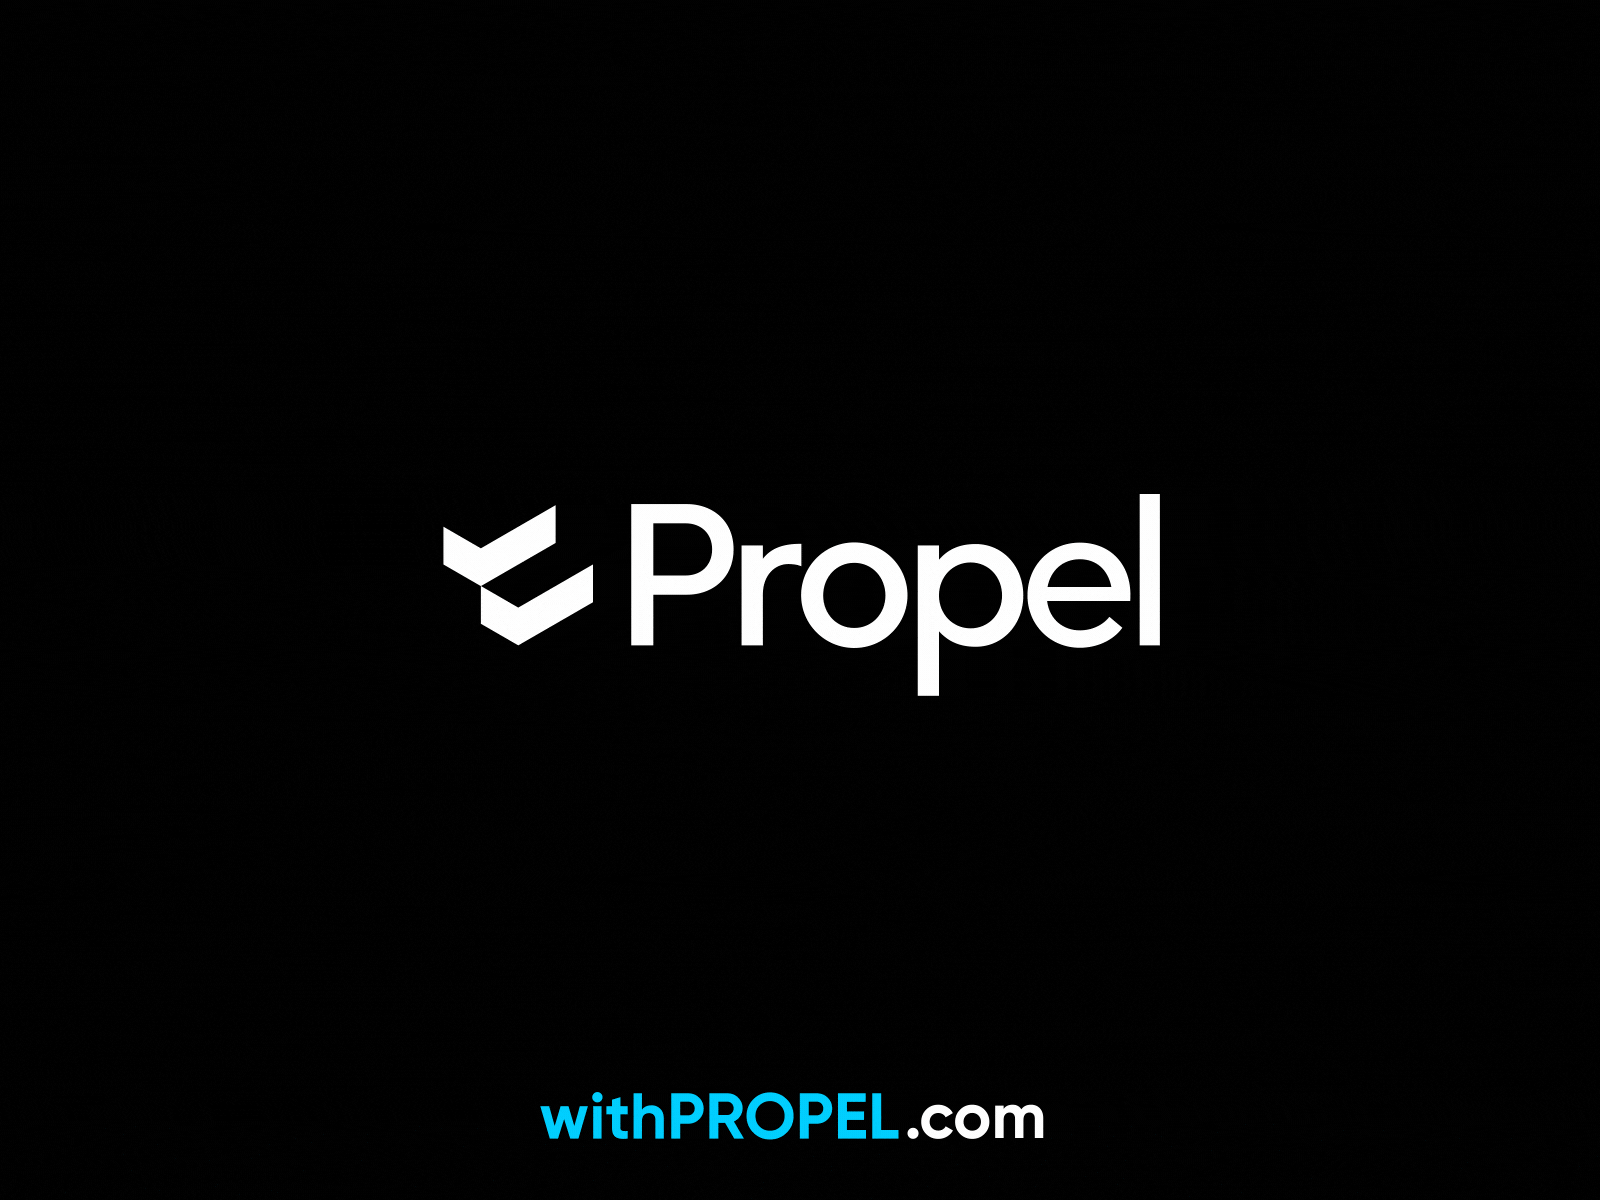 Propel - Authentic, Bold and Future-centric 🔥 animation assets branding design ecosystem graphic design illustration logo motion graphics propel talent vector work